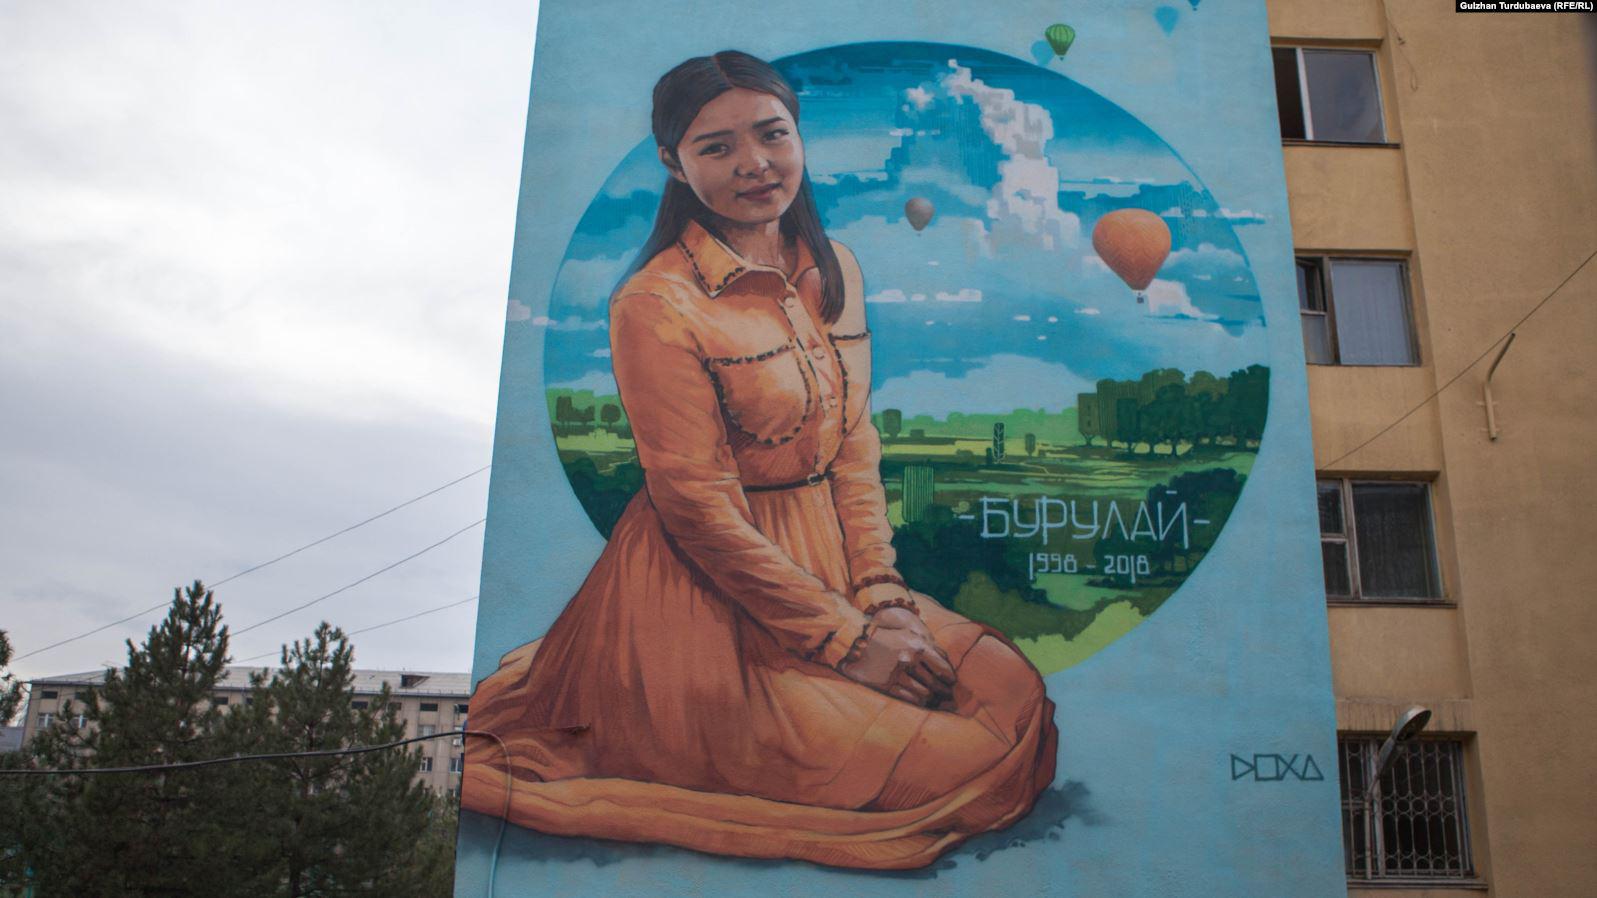 Burulai Turdaaly kyzy’s portrait on a building at the medical college she attended in Bishkek, November 2018.